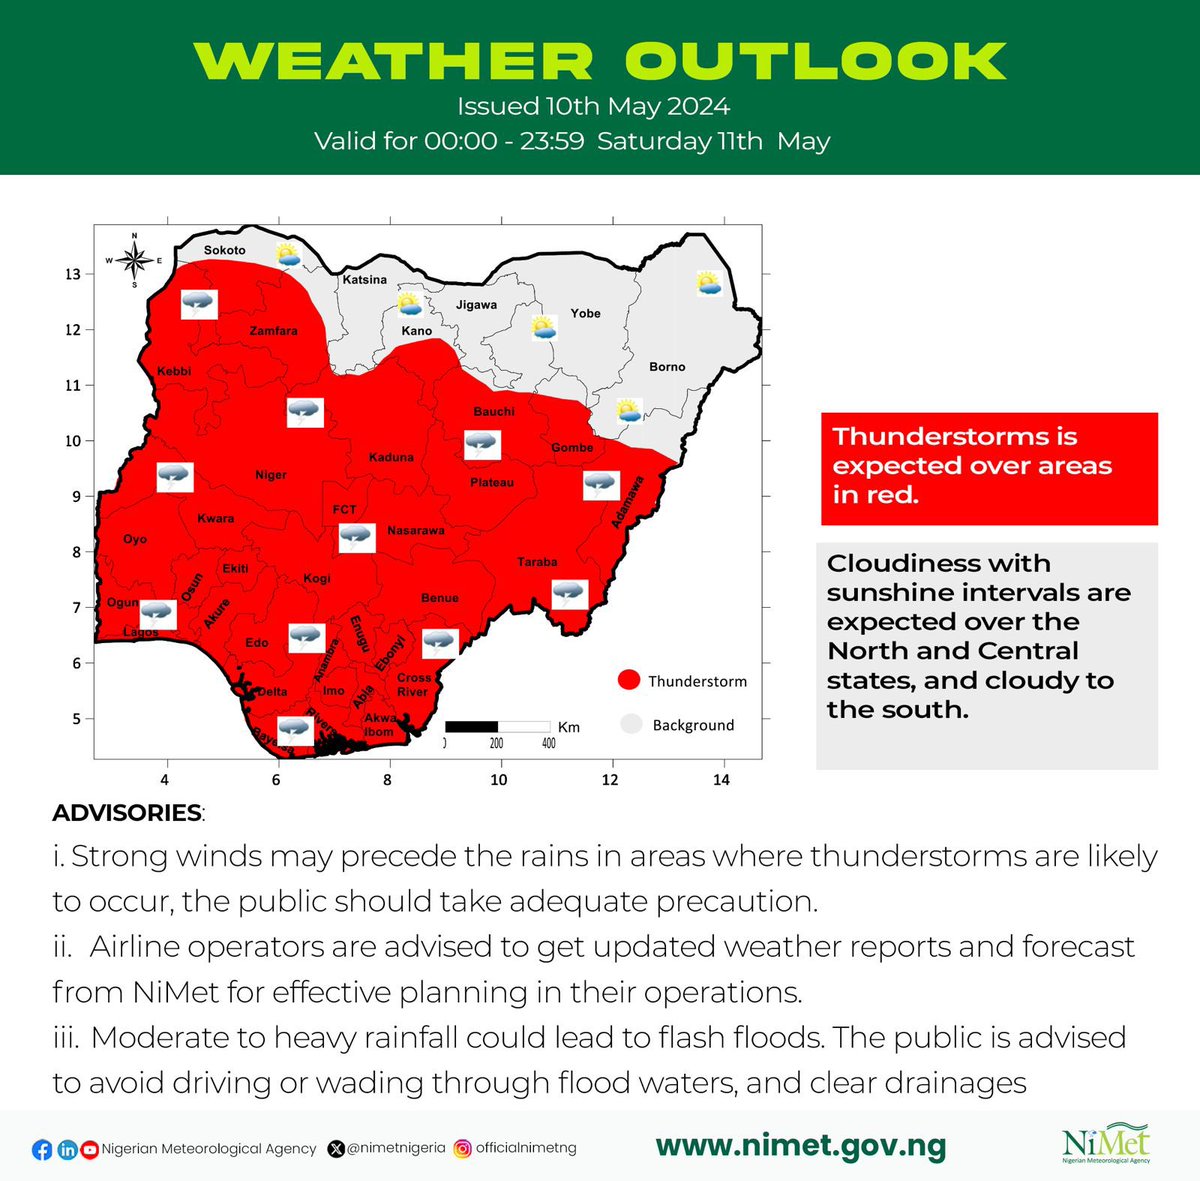 Weather Outlook issued 10th Valid 00:00 - 23:59 Saturday 11th May

Visit: youtu.be/r5WA_SGUnYE?si…
To watch weather forecast video 

#beweatheraware #nigerianweather #thunderstorms #cloudiness #cloudy #sunny #climatechange #flashfloods